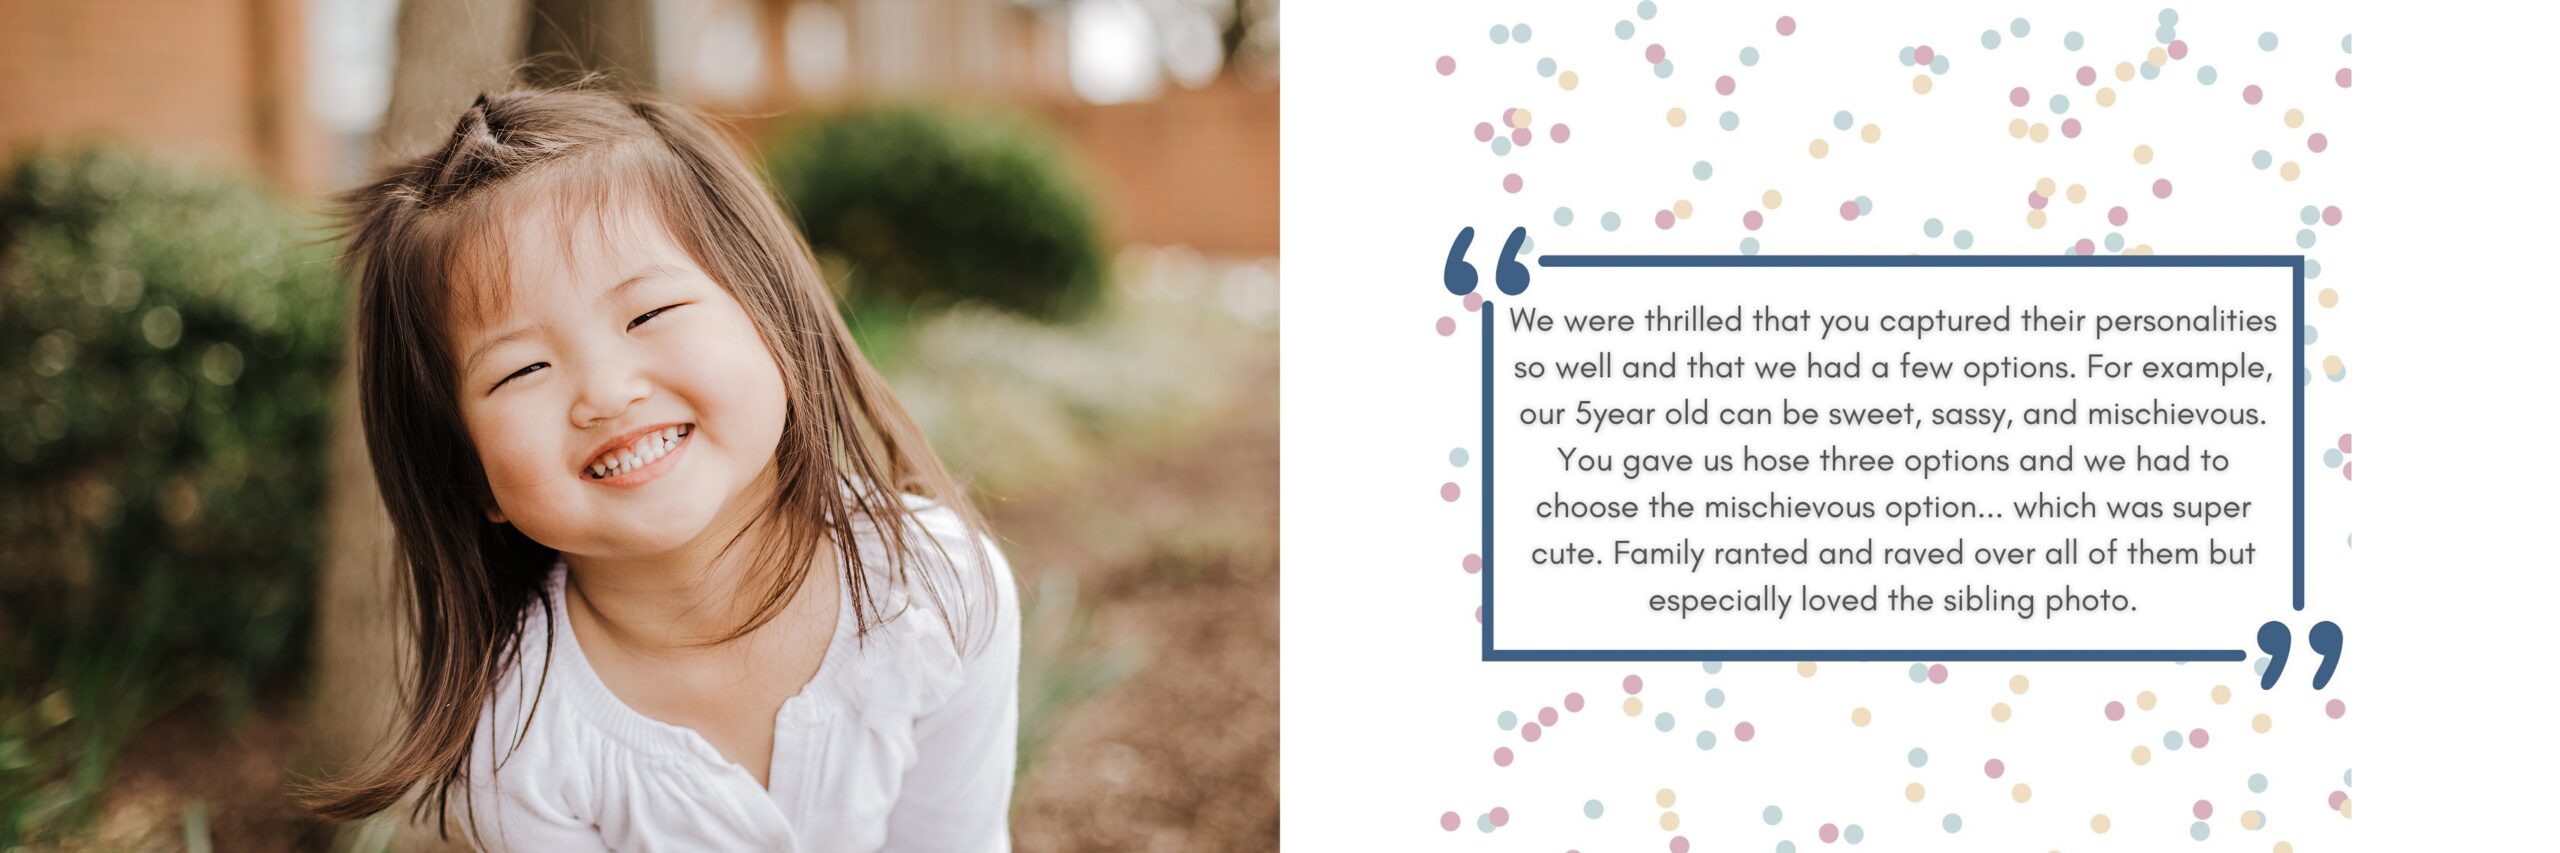 Testimonial of parent experience with me as their school photographer in Northern Virginia. Serving all of Loudoun, Fairfax, and Arlington counties.